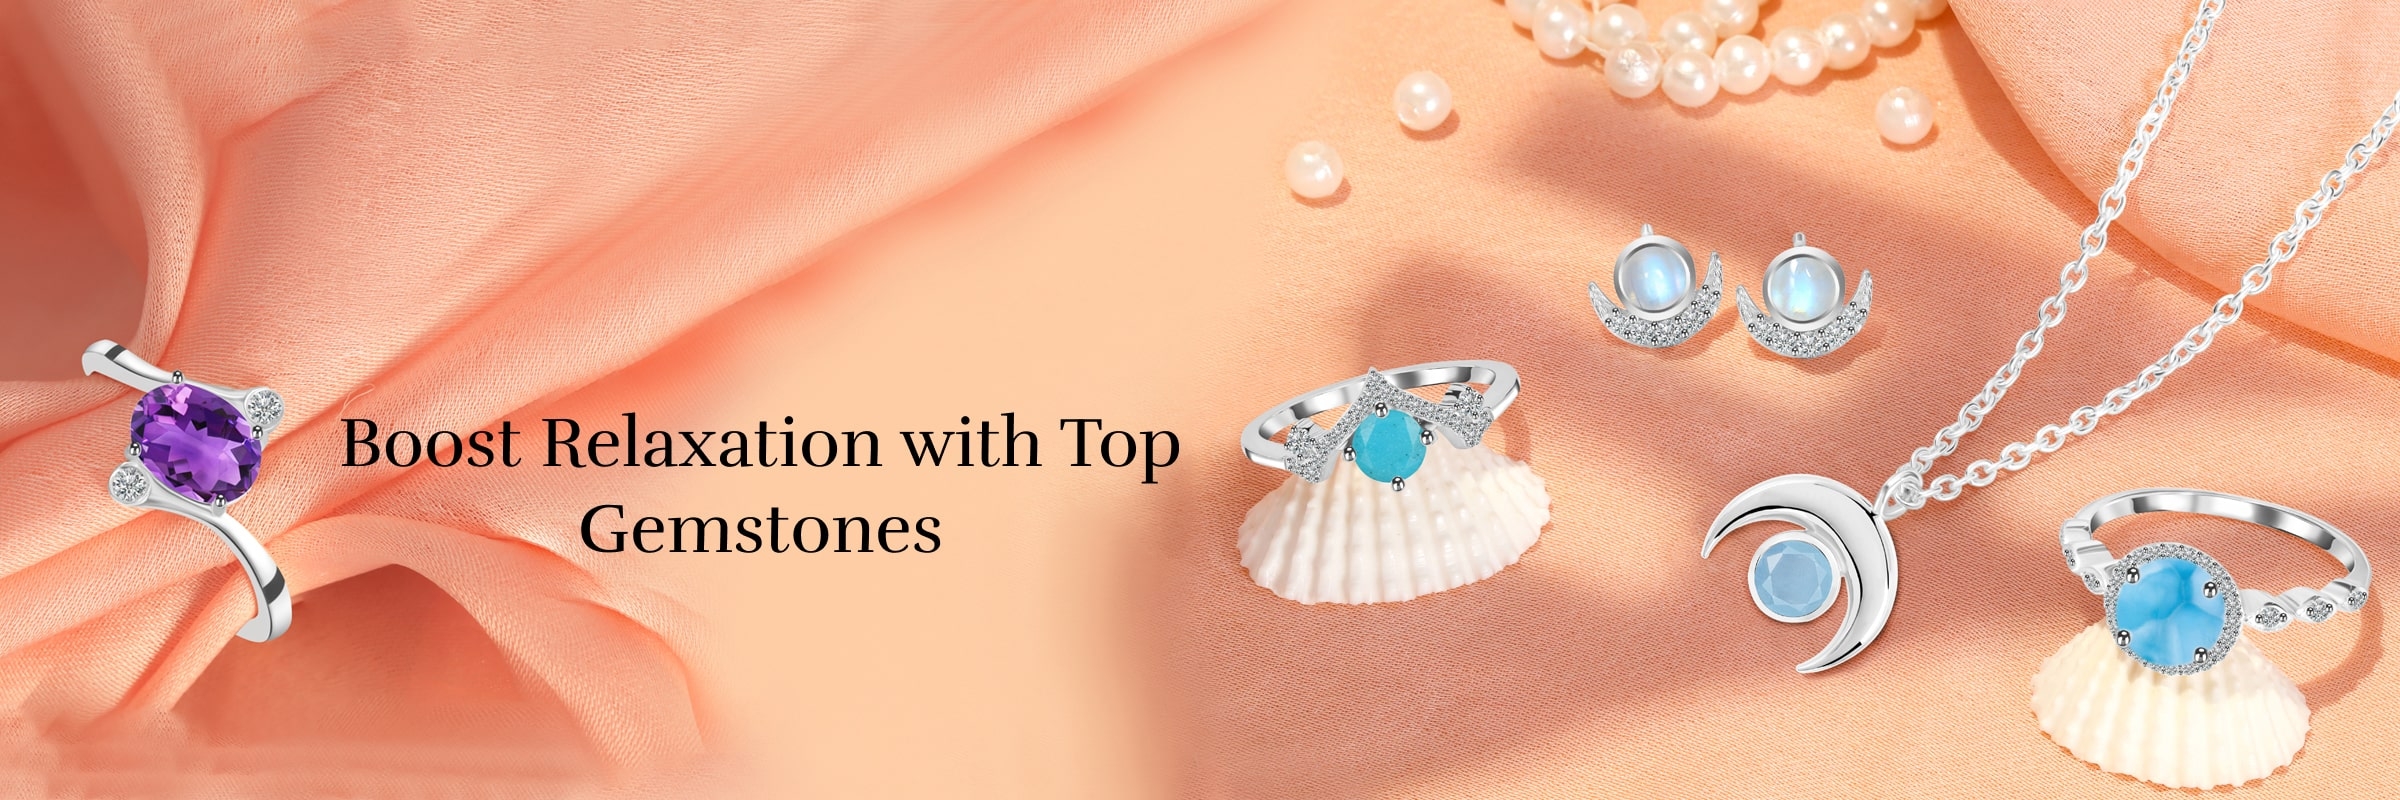 Top 8 Gemstones that Boost Relaxation